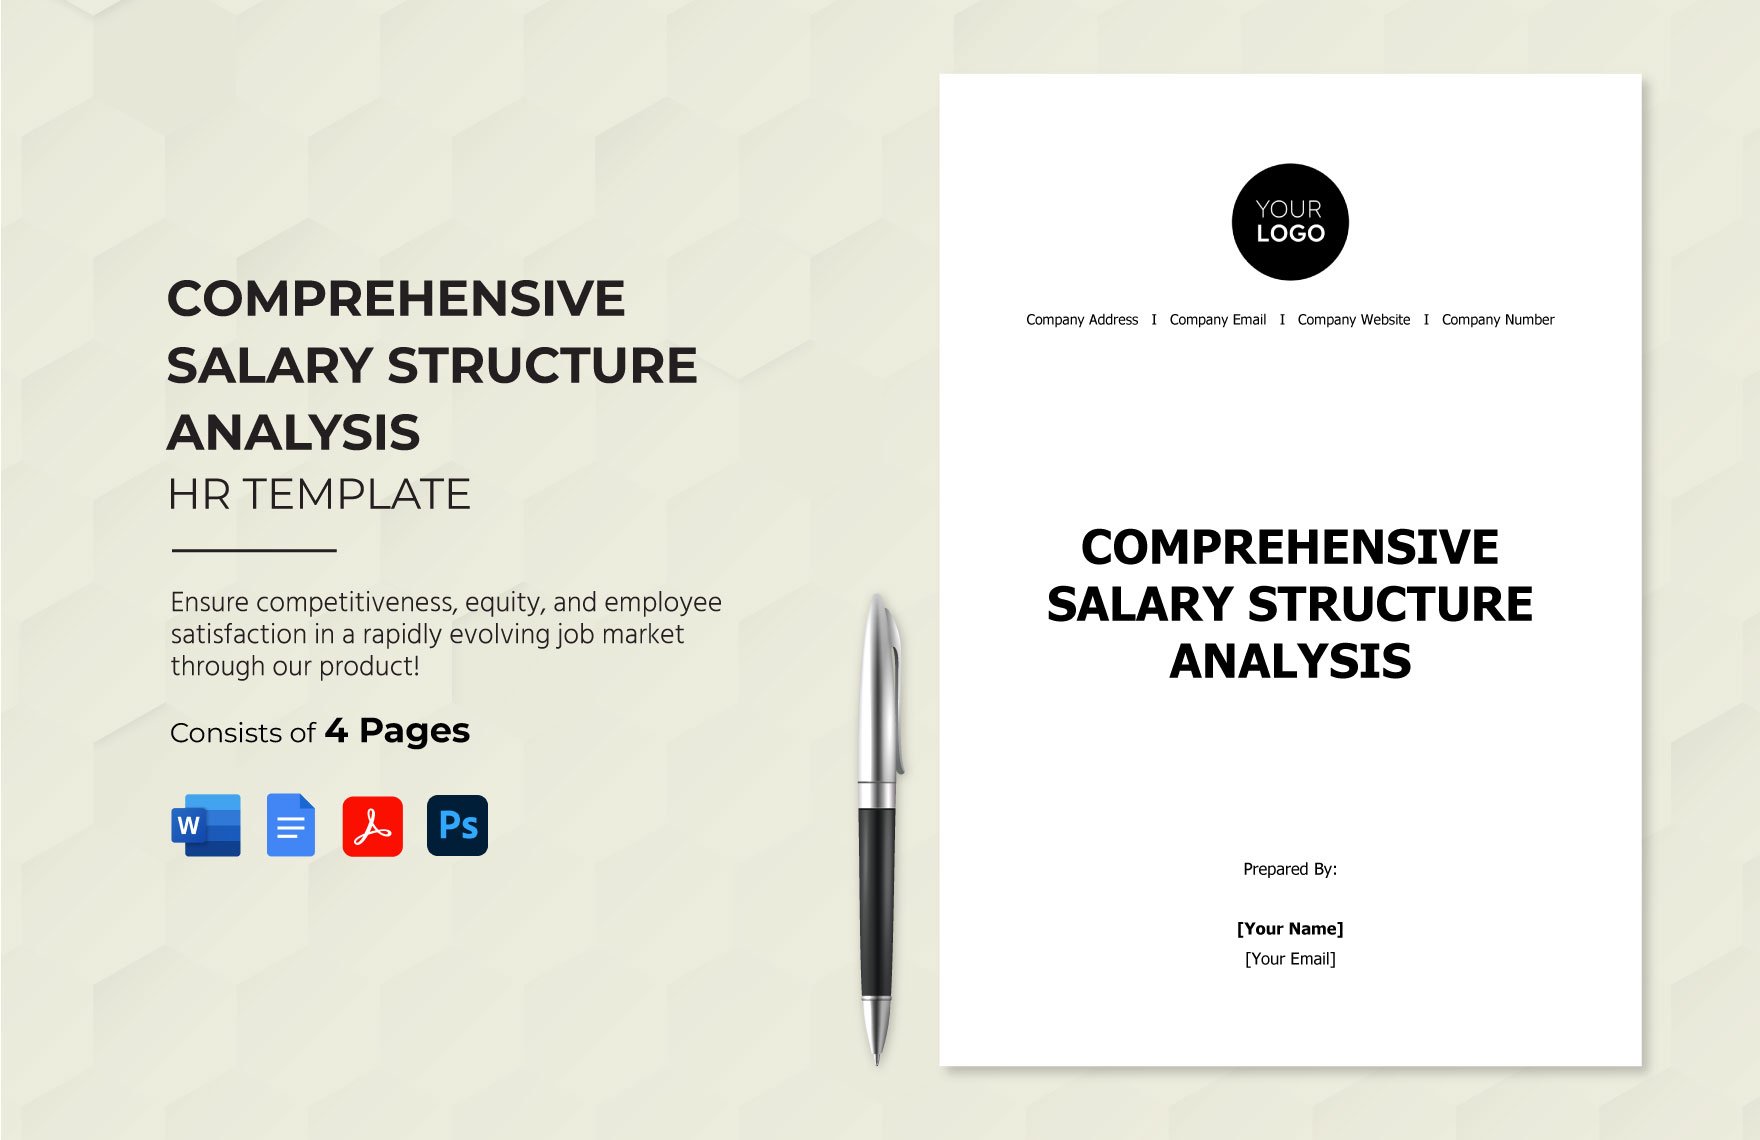 Comprehensive Salary Structure Analysis HR Template